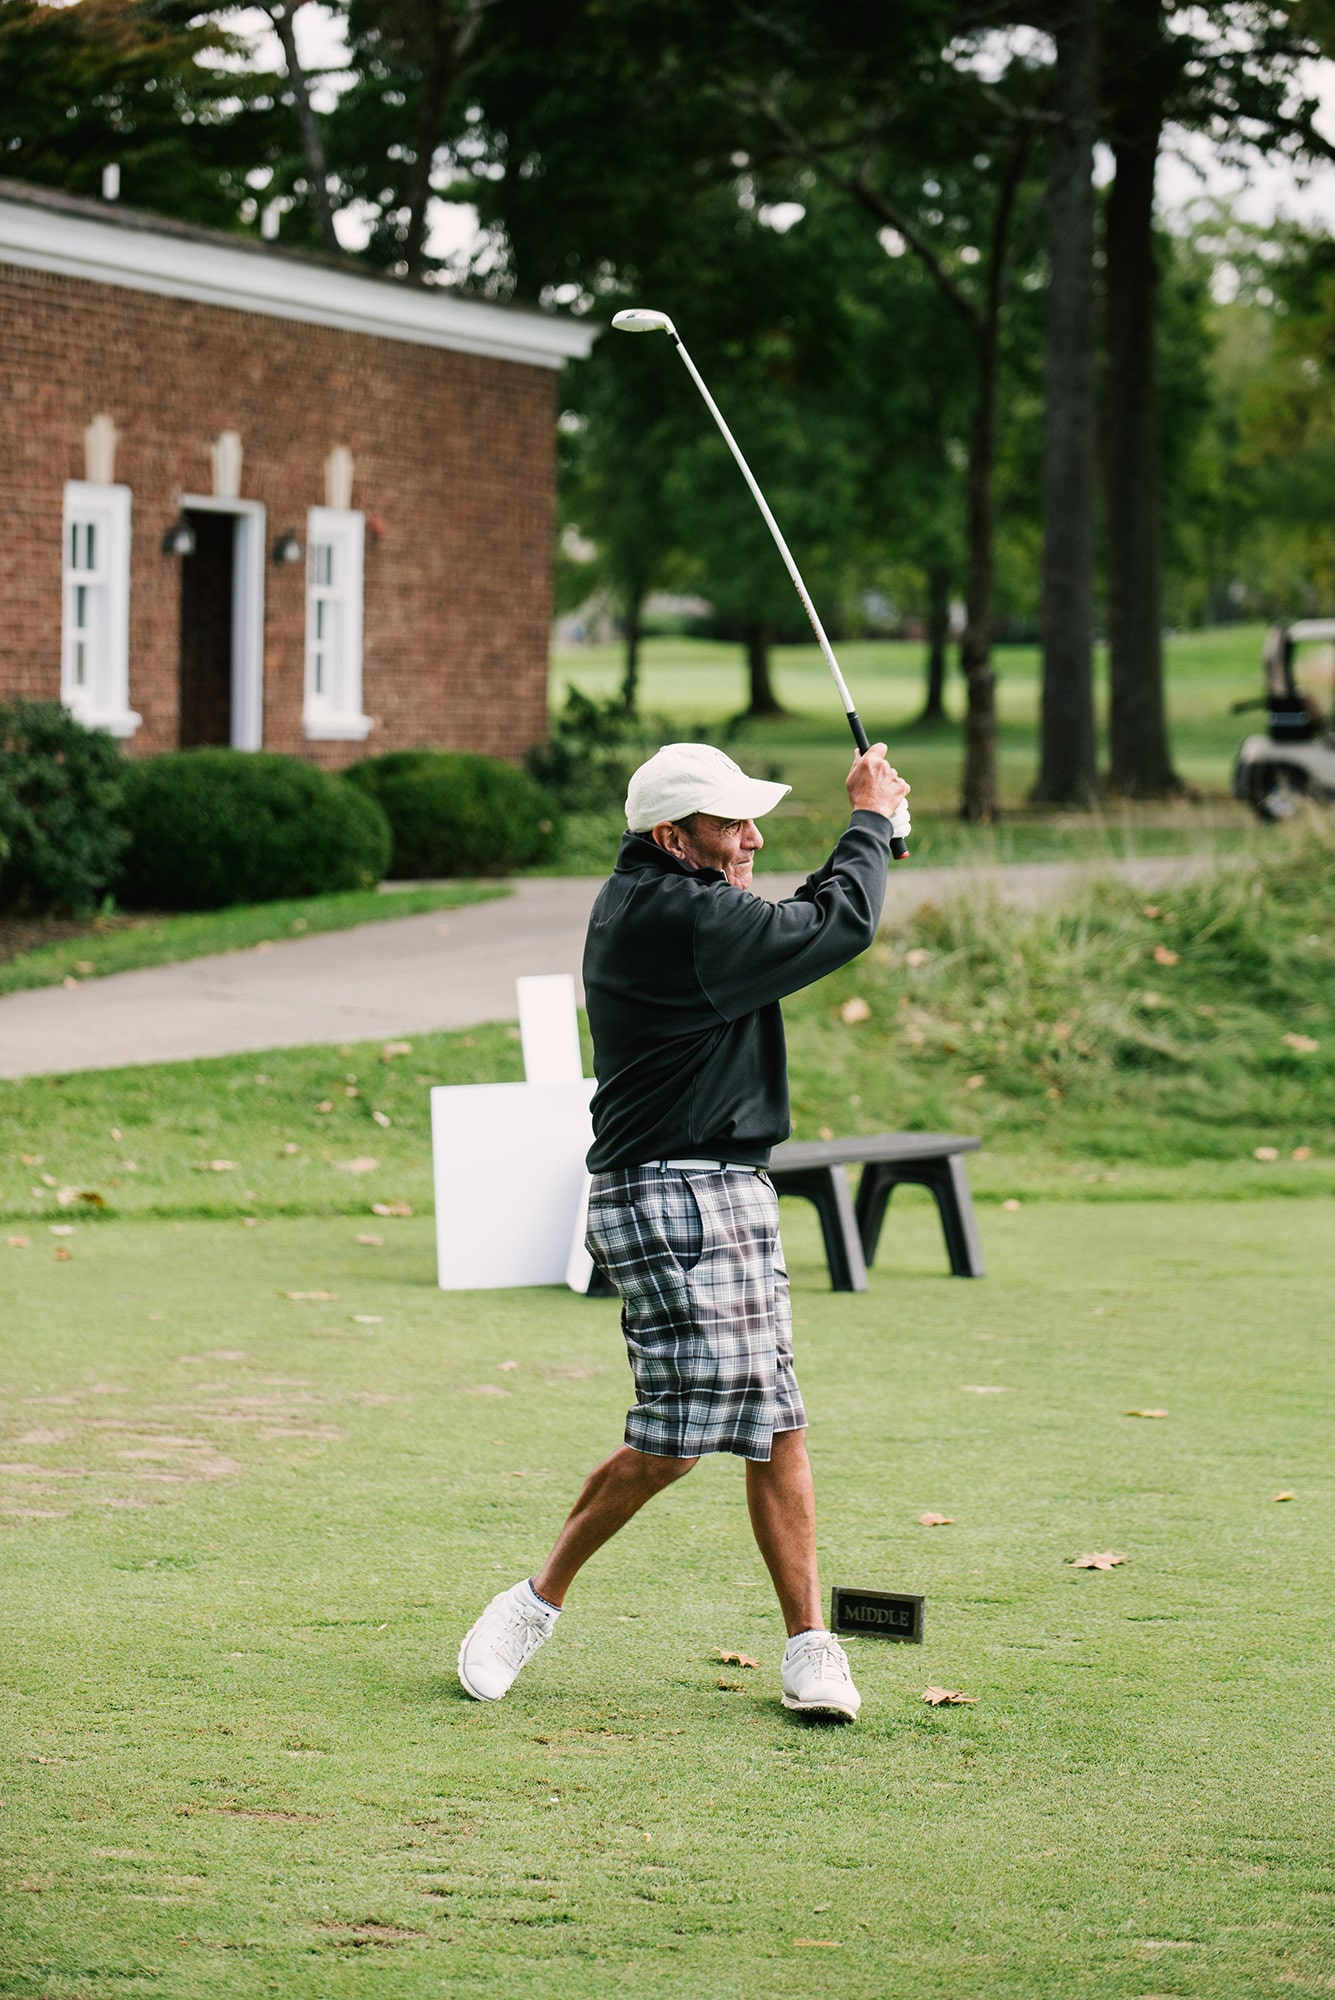 On October 5th, 2020 Community Options, Inc. hosted its golf outing at TPC Jasna Polana in Princeton, New Jersey.